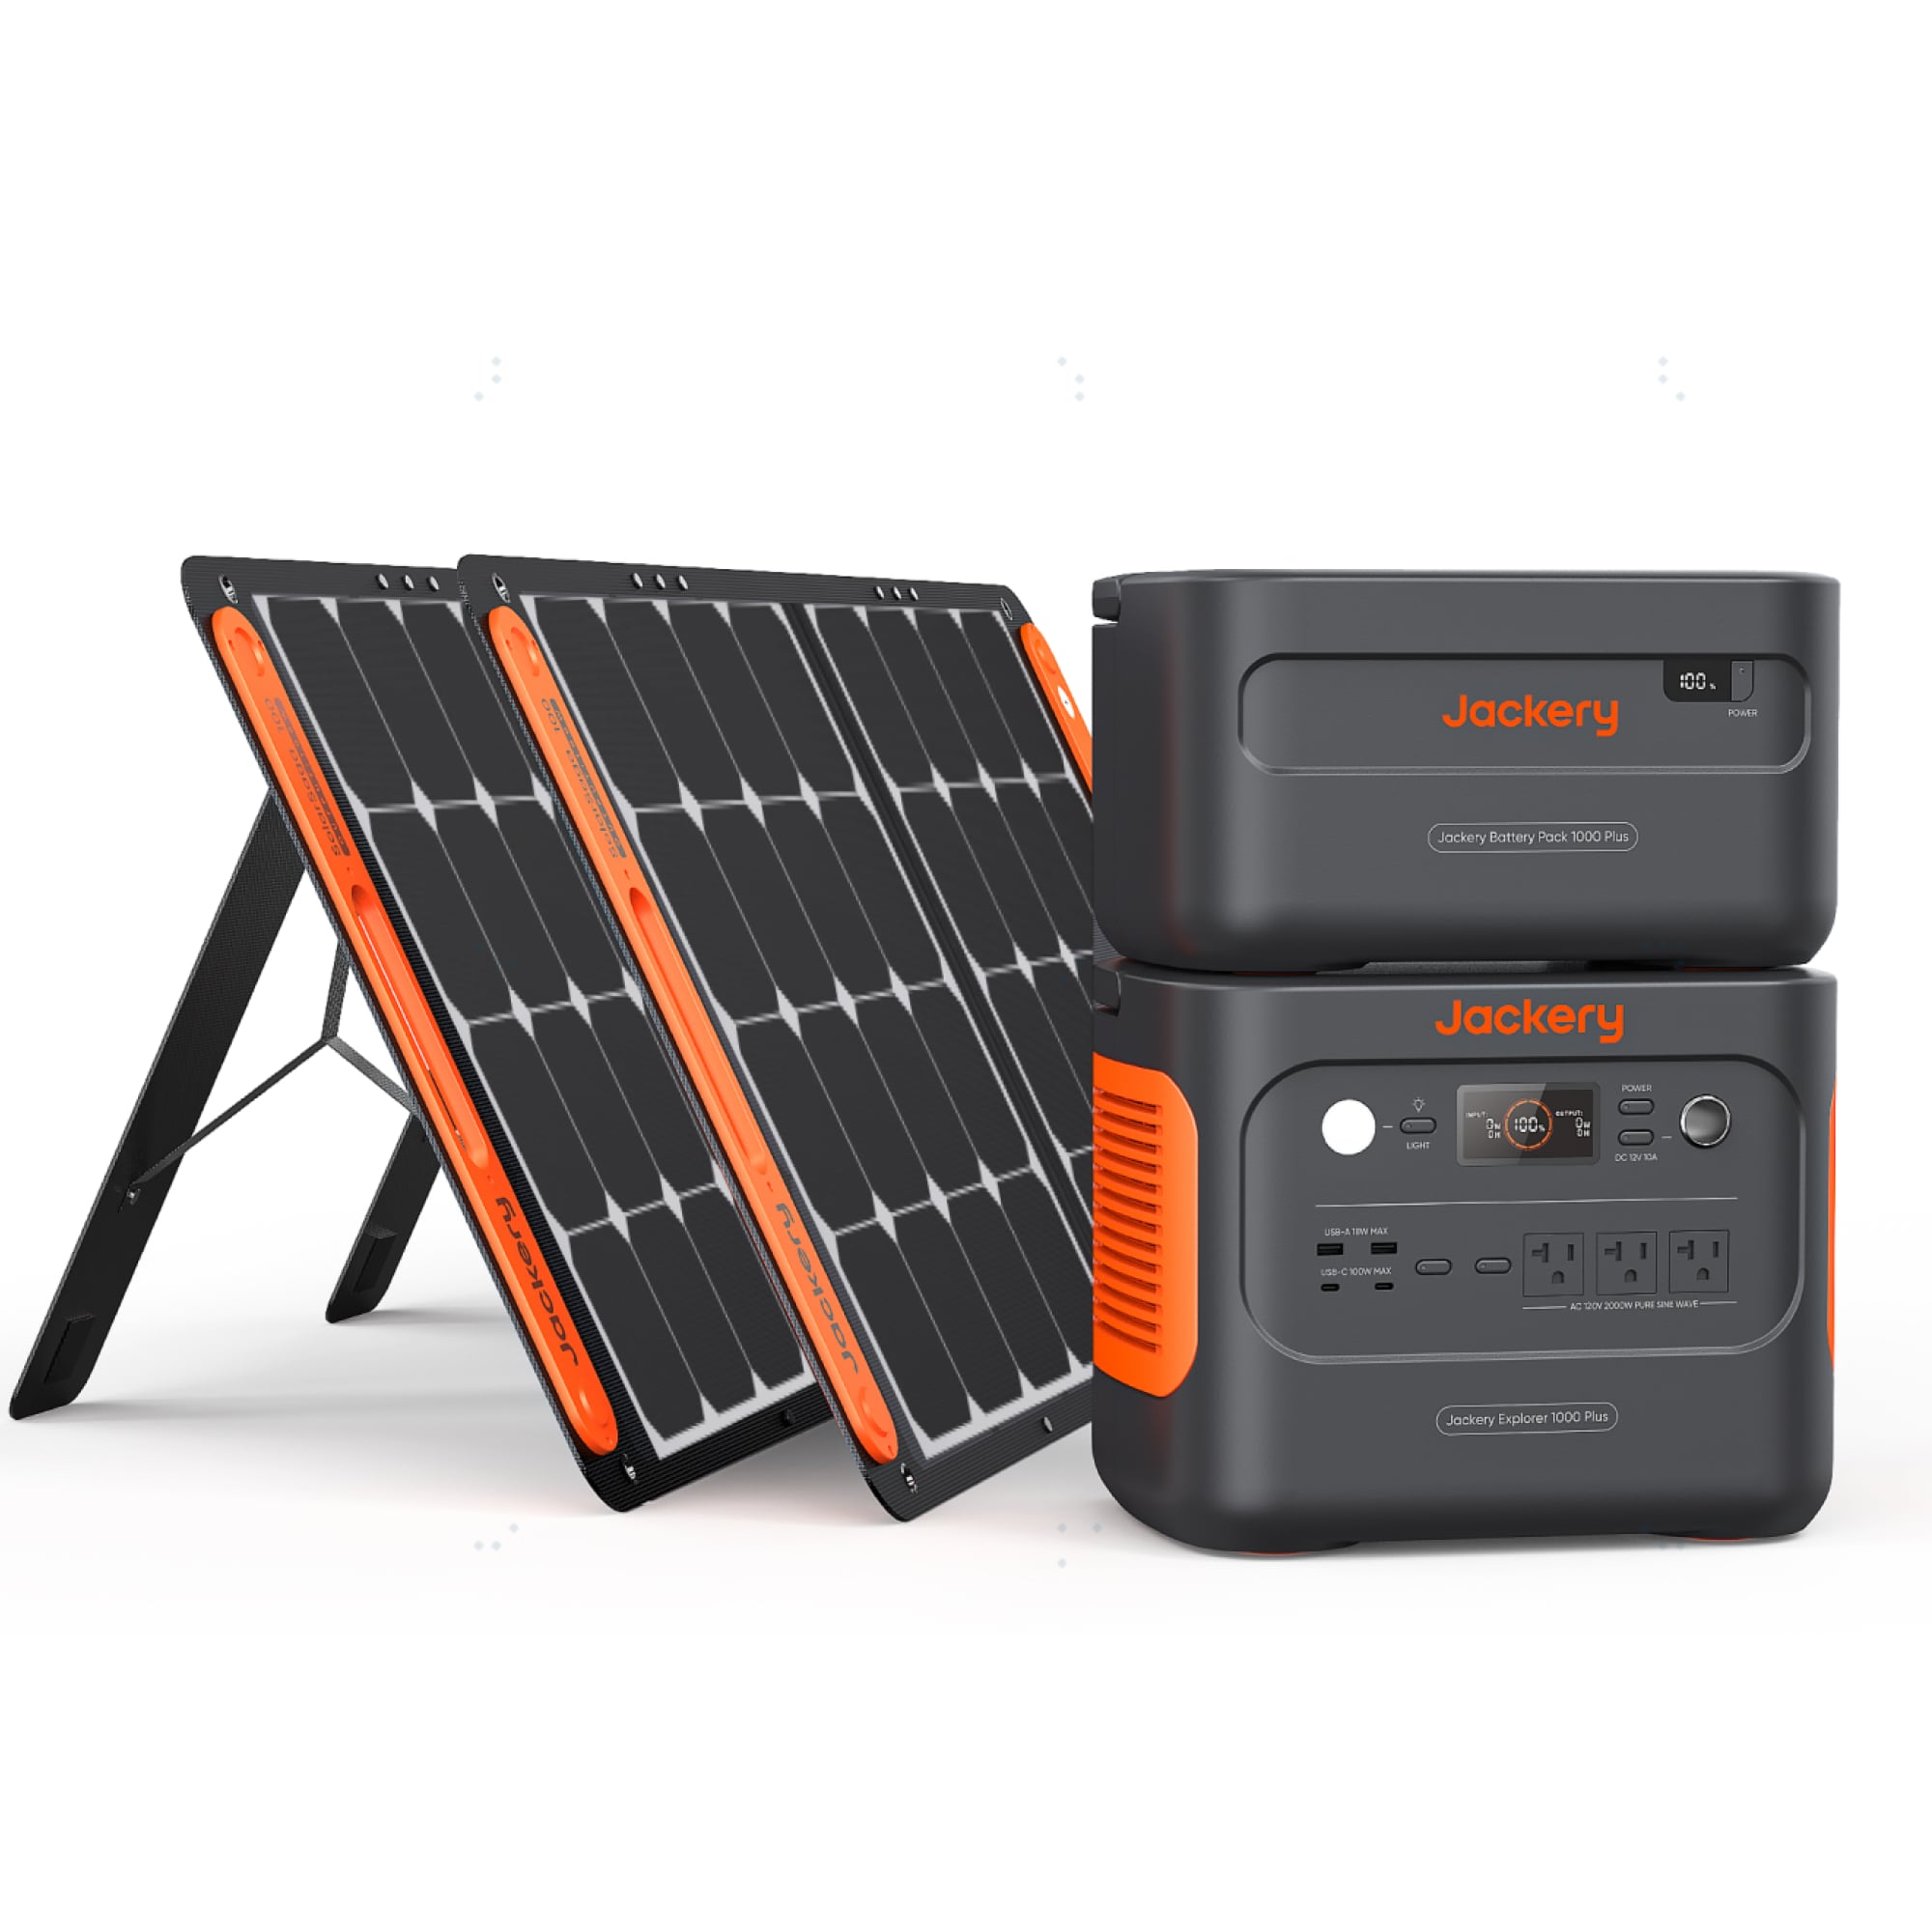  Jackery Portable Power Station Explorer 1000, 1002Wh Solar  Generator (Solar Panel Optional) with 3x110V/1000W AC Outlets, Solar  Lithium Battery Pack for Outdoor RV/Van Camping, Emergency (Renewed) :  Patio, Lawn & Garden